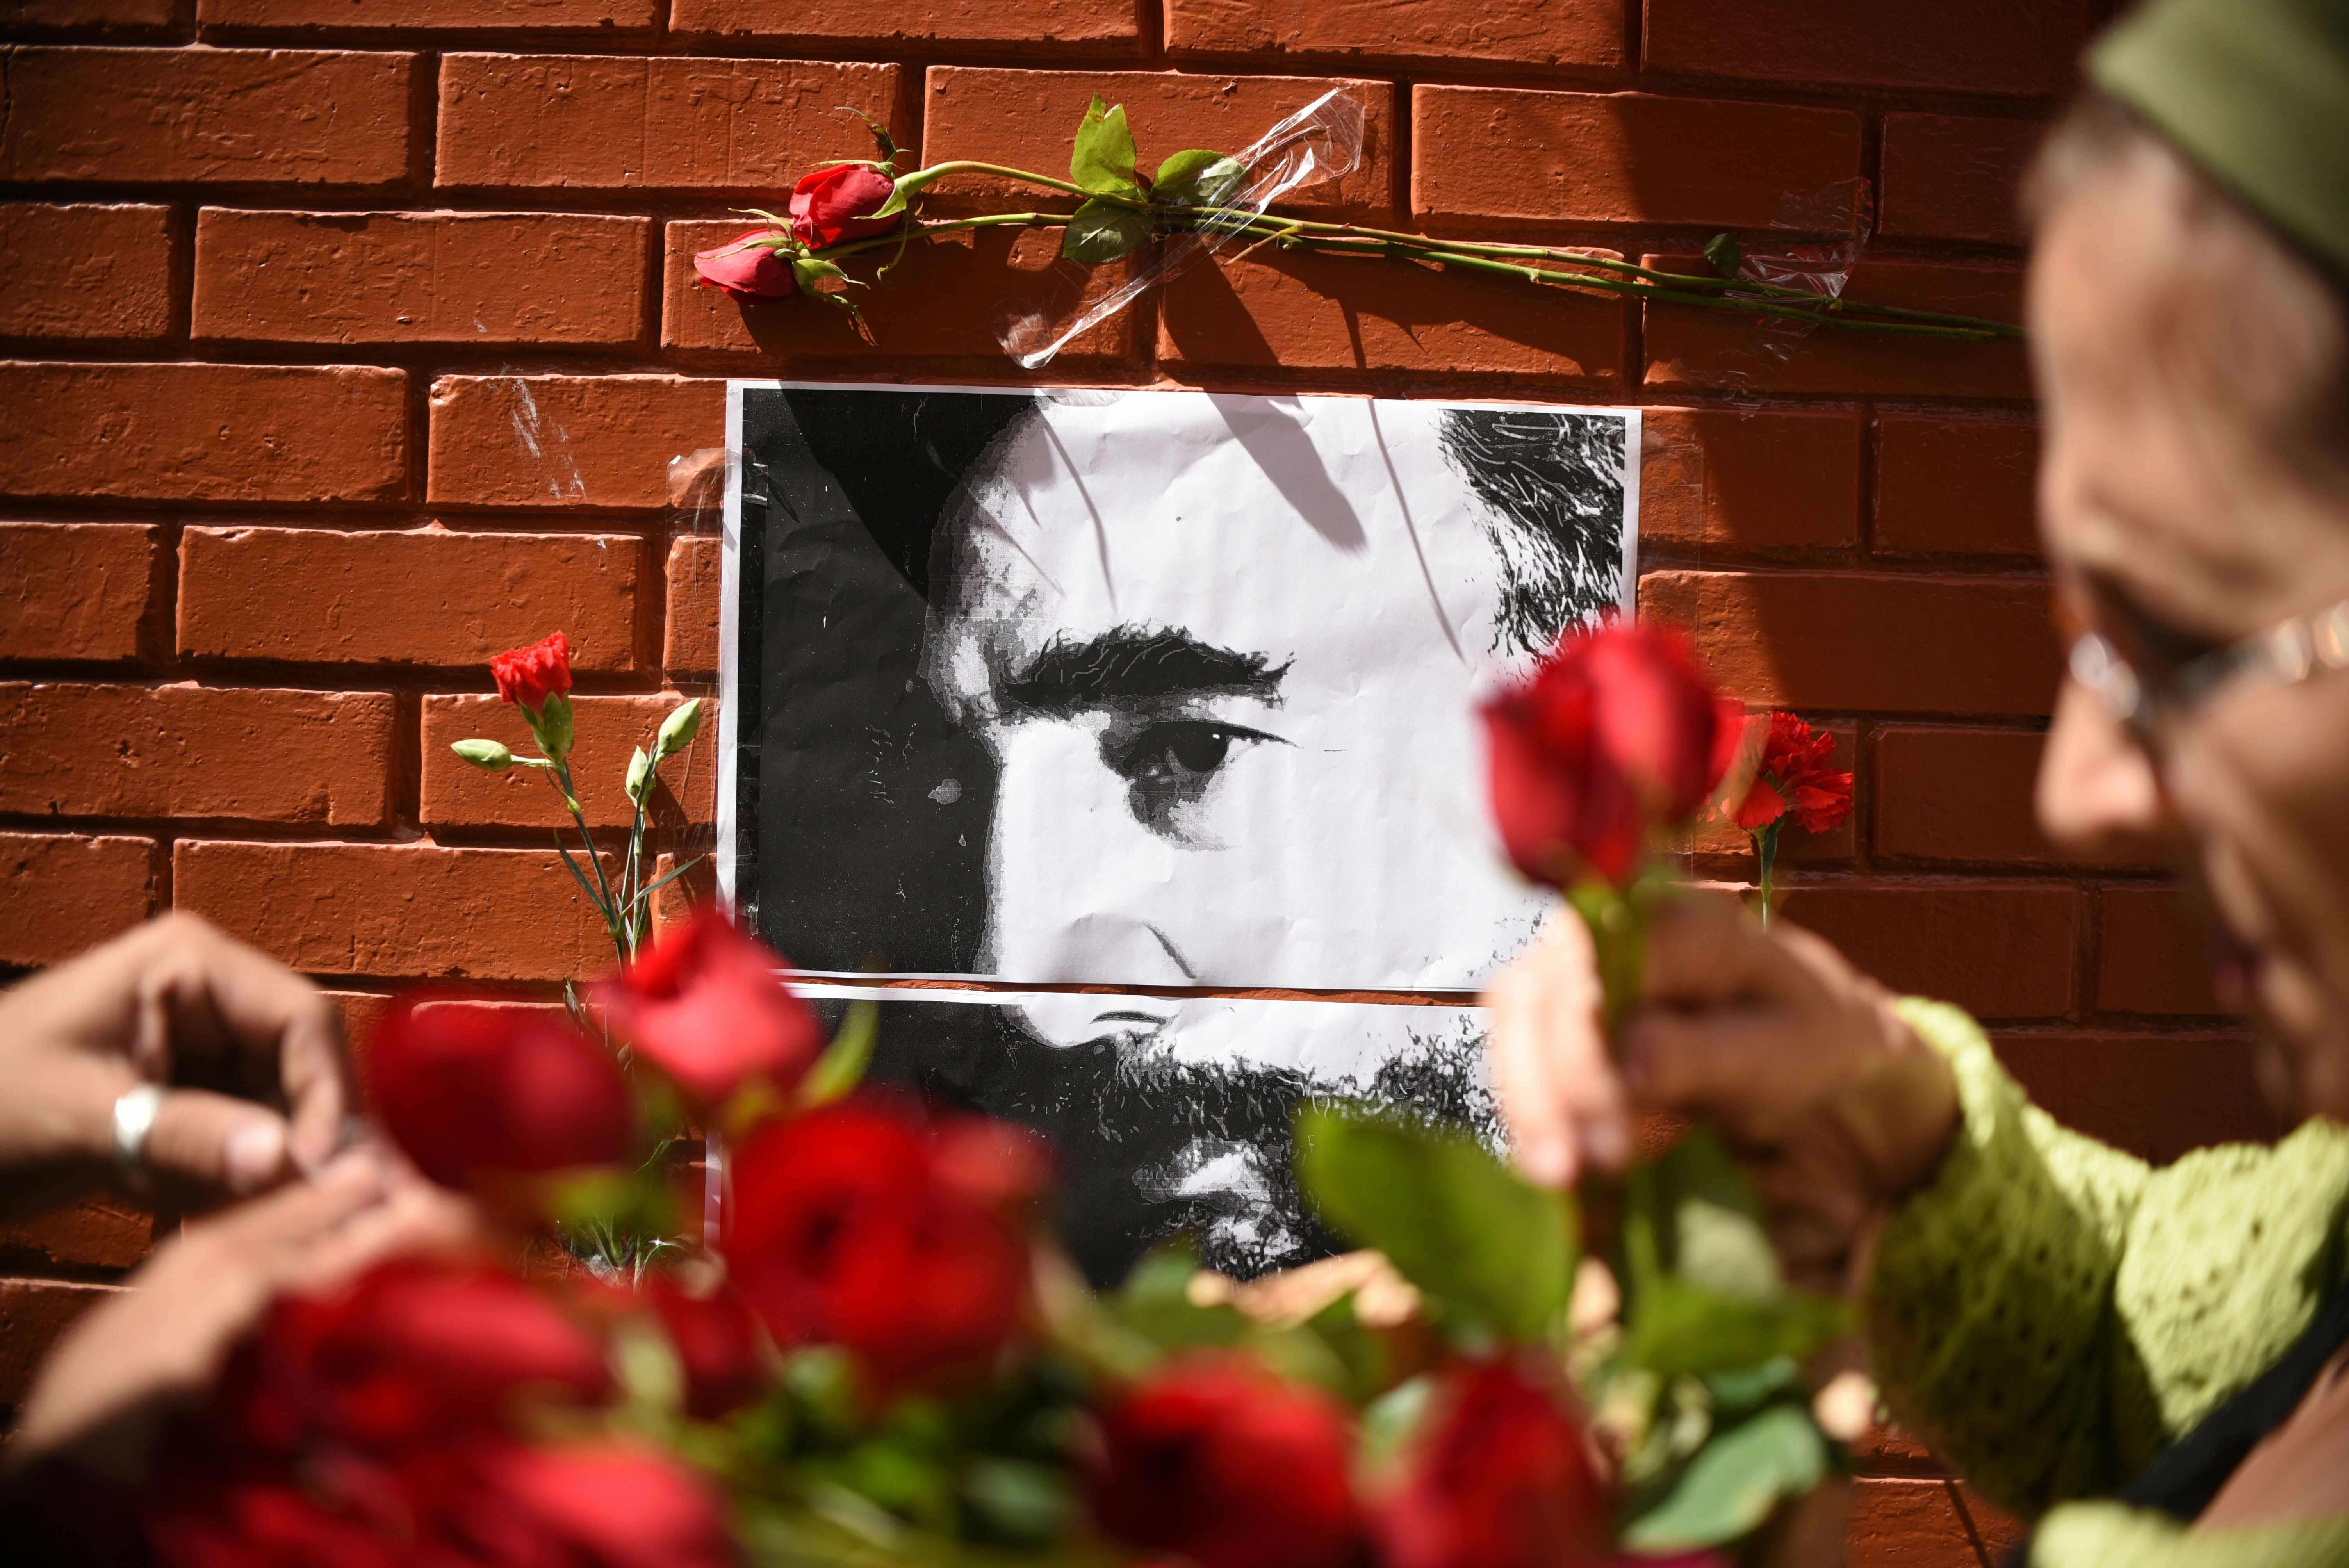 People place flowers next to a portrait of Fidel Castro outside the Cuban embassy in Guatemala City. Photo: AFP